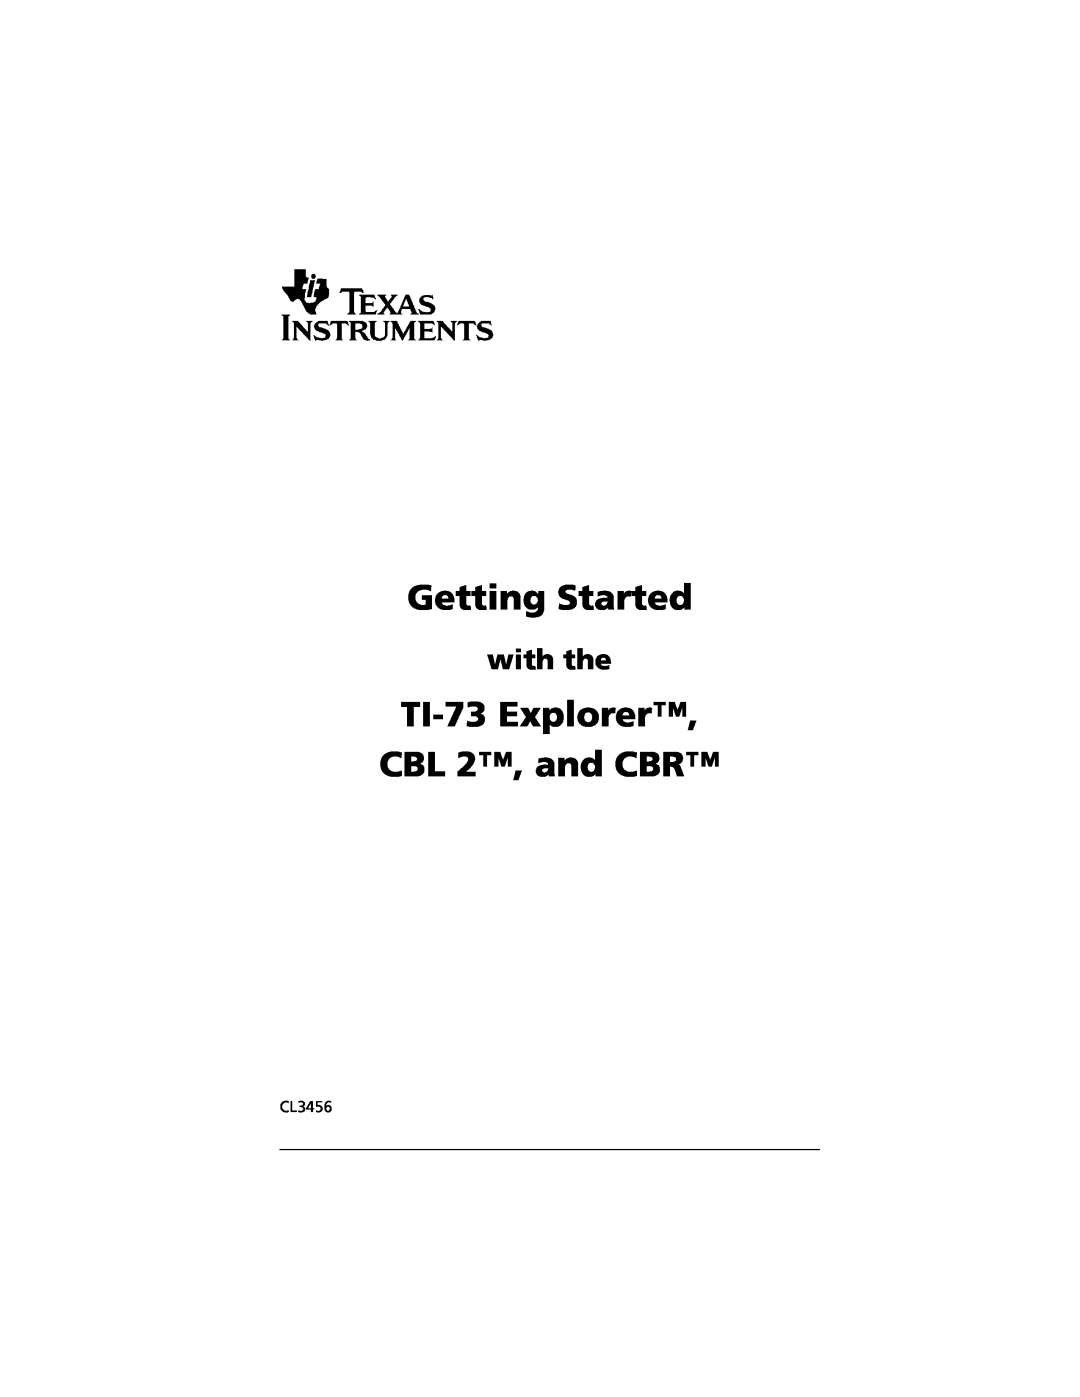 Texas Instruments manual Getting Started, TI-73 Explorer CBL 2, and CBR, with the 